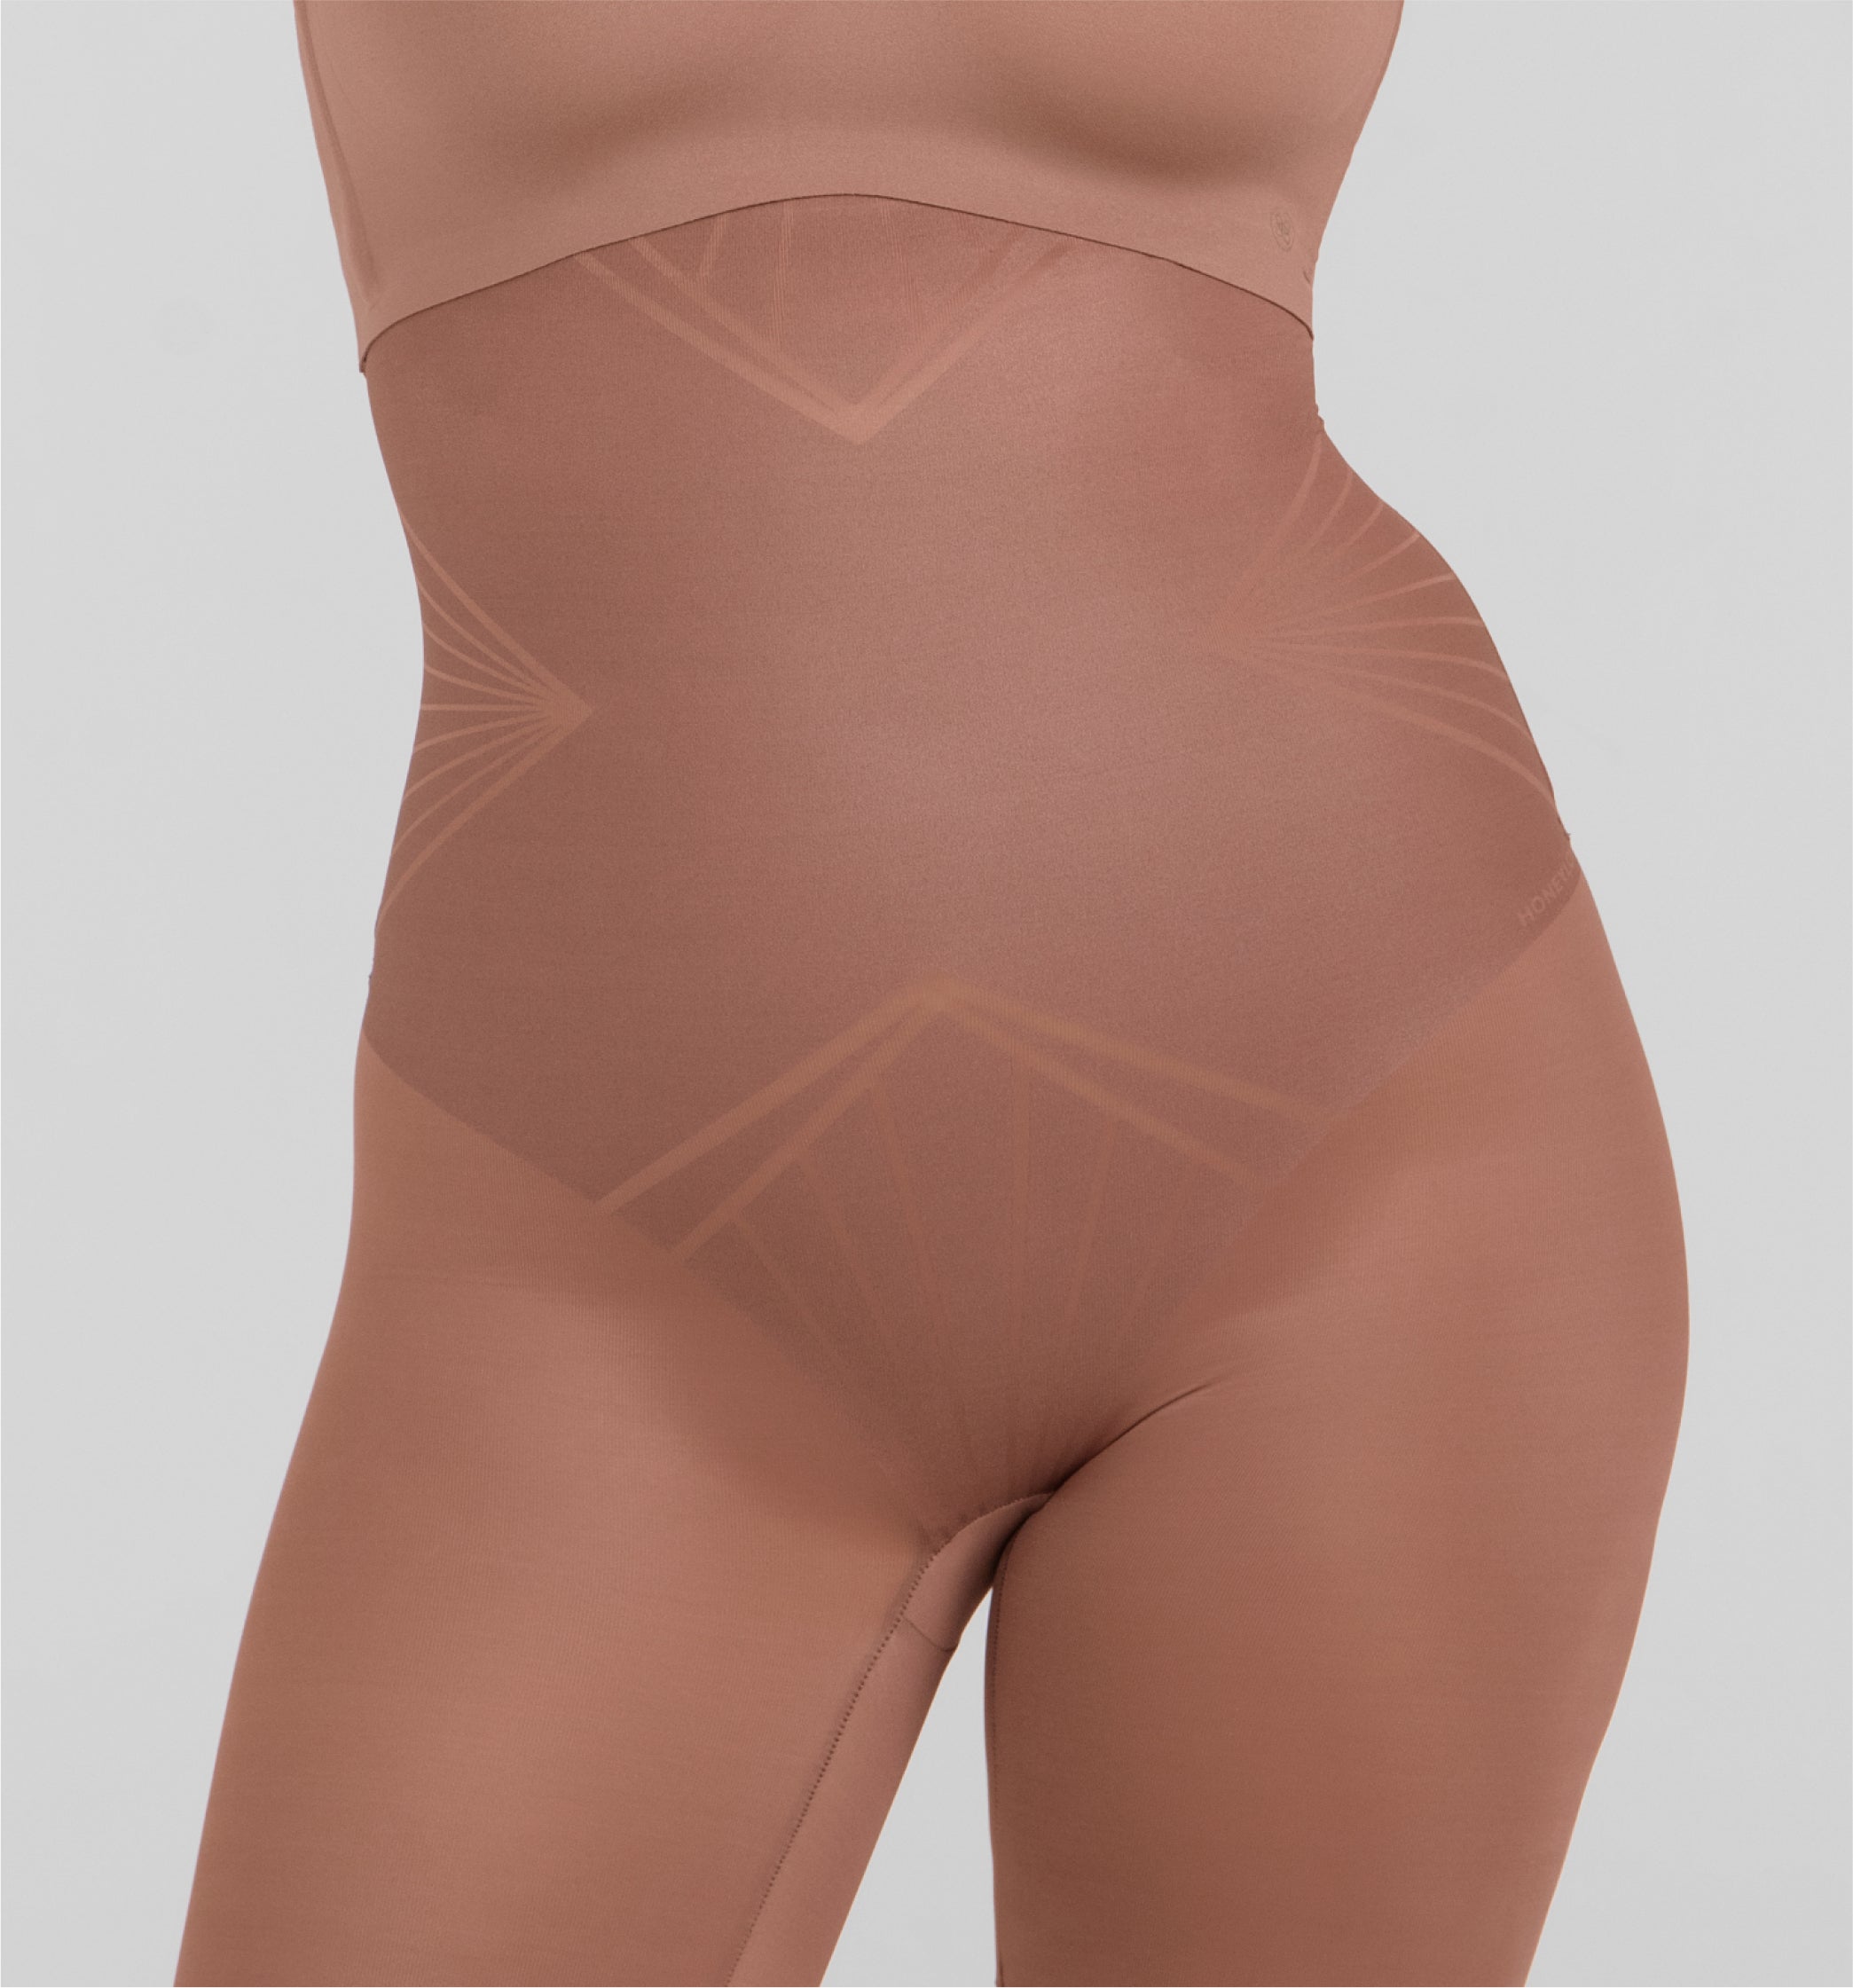 Sculptwear by HoneyLove: NEW IN: The WaistHero Cincher is selling fast